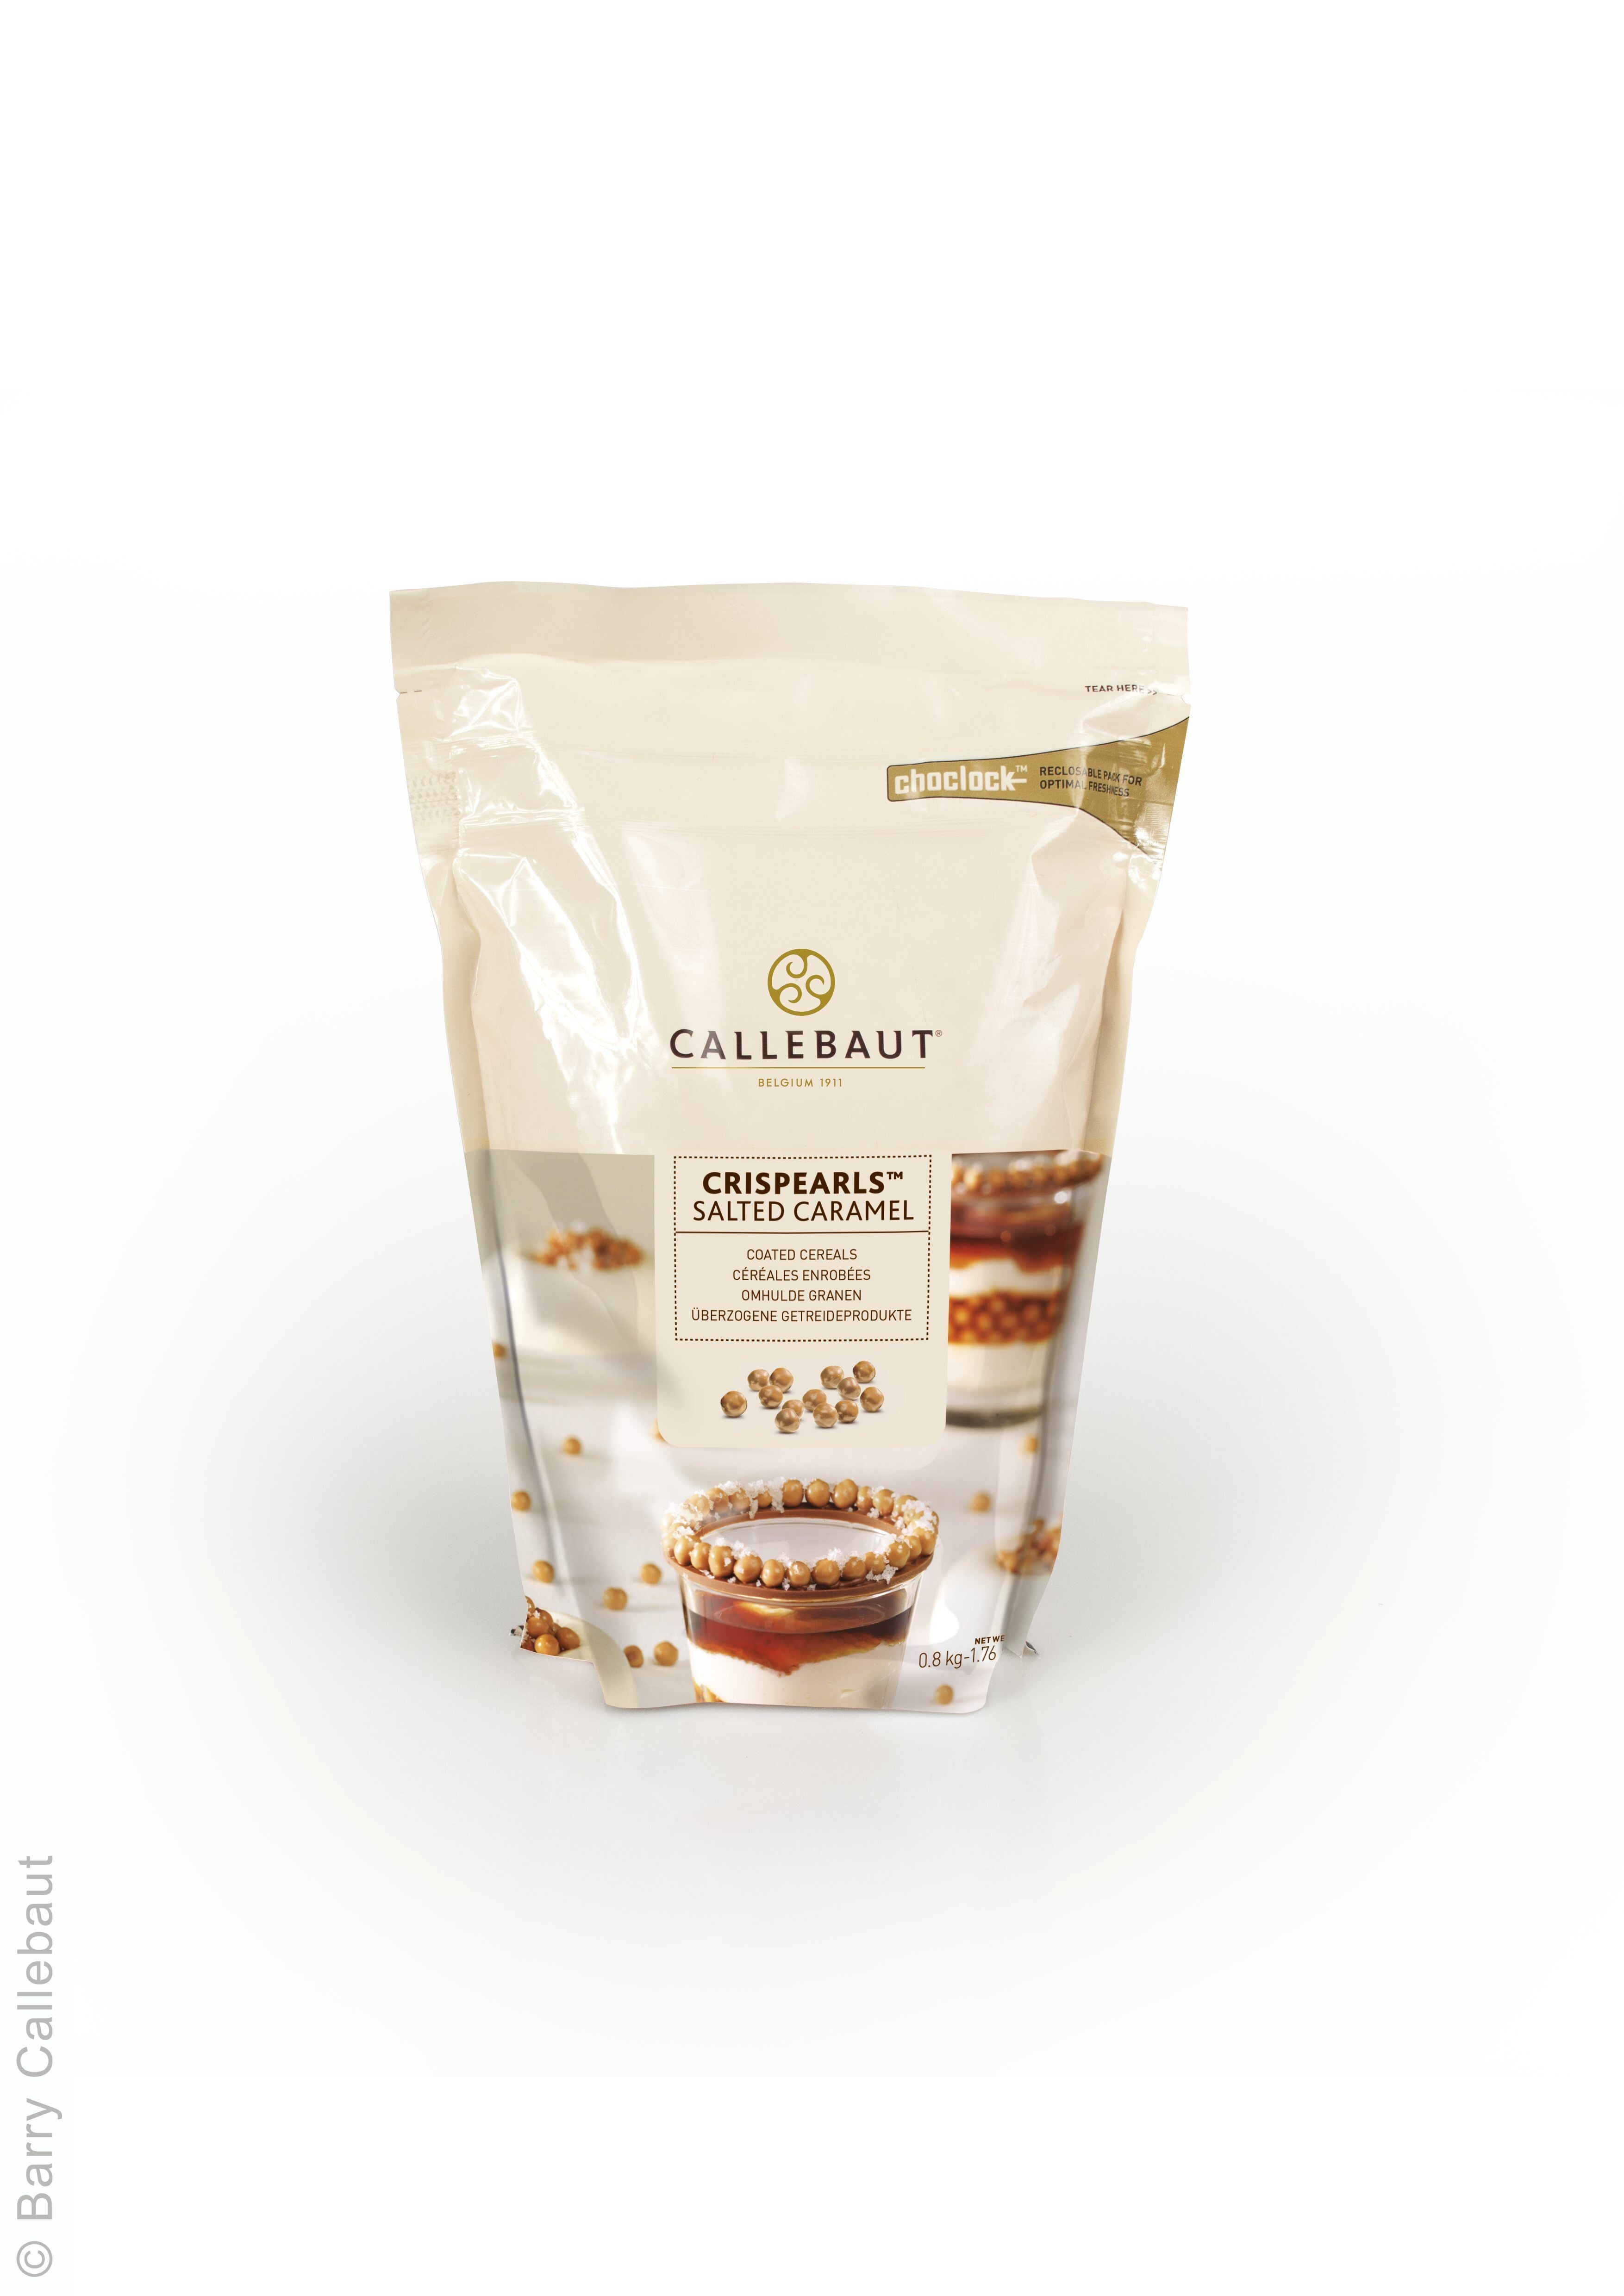 Callebaut Crispearls cereals coated with Salted Caramel 1.76lbs 800gr